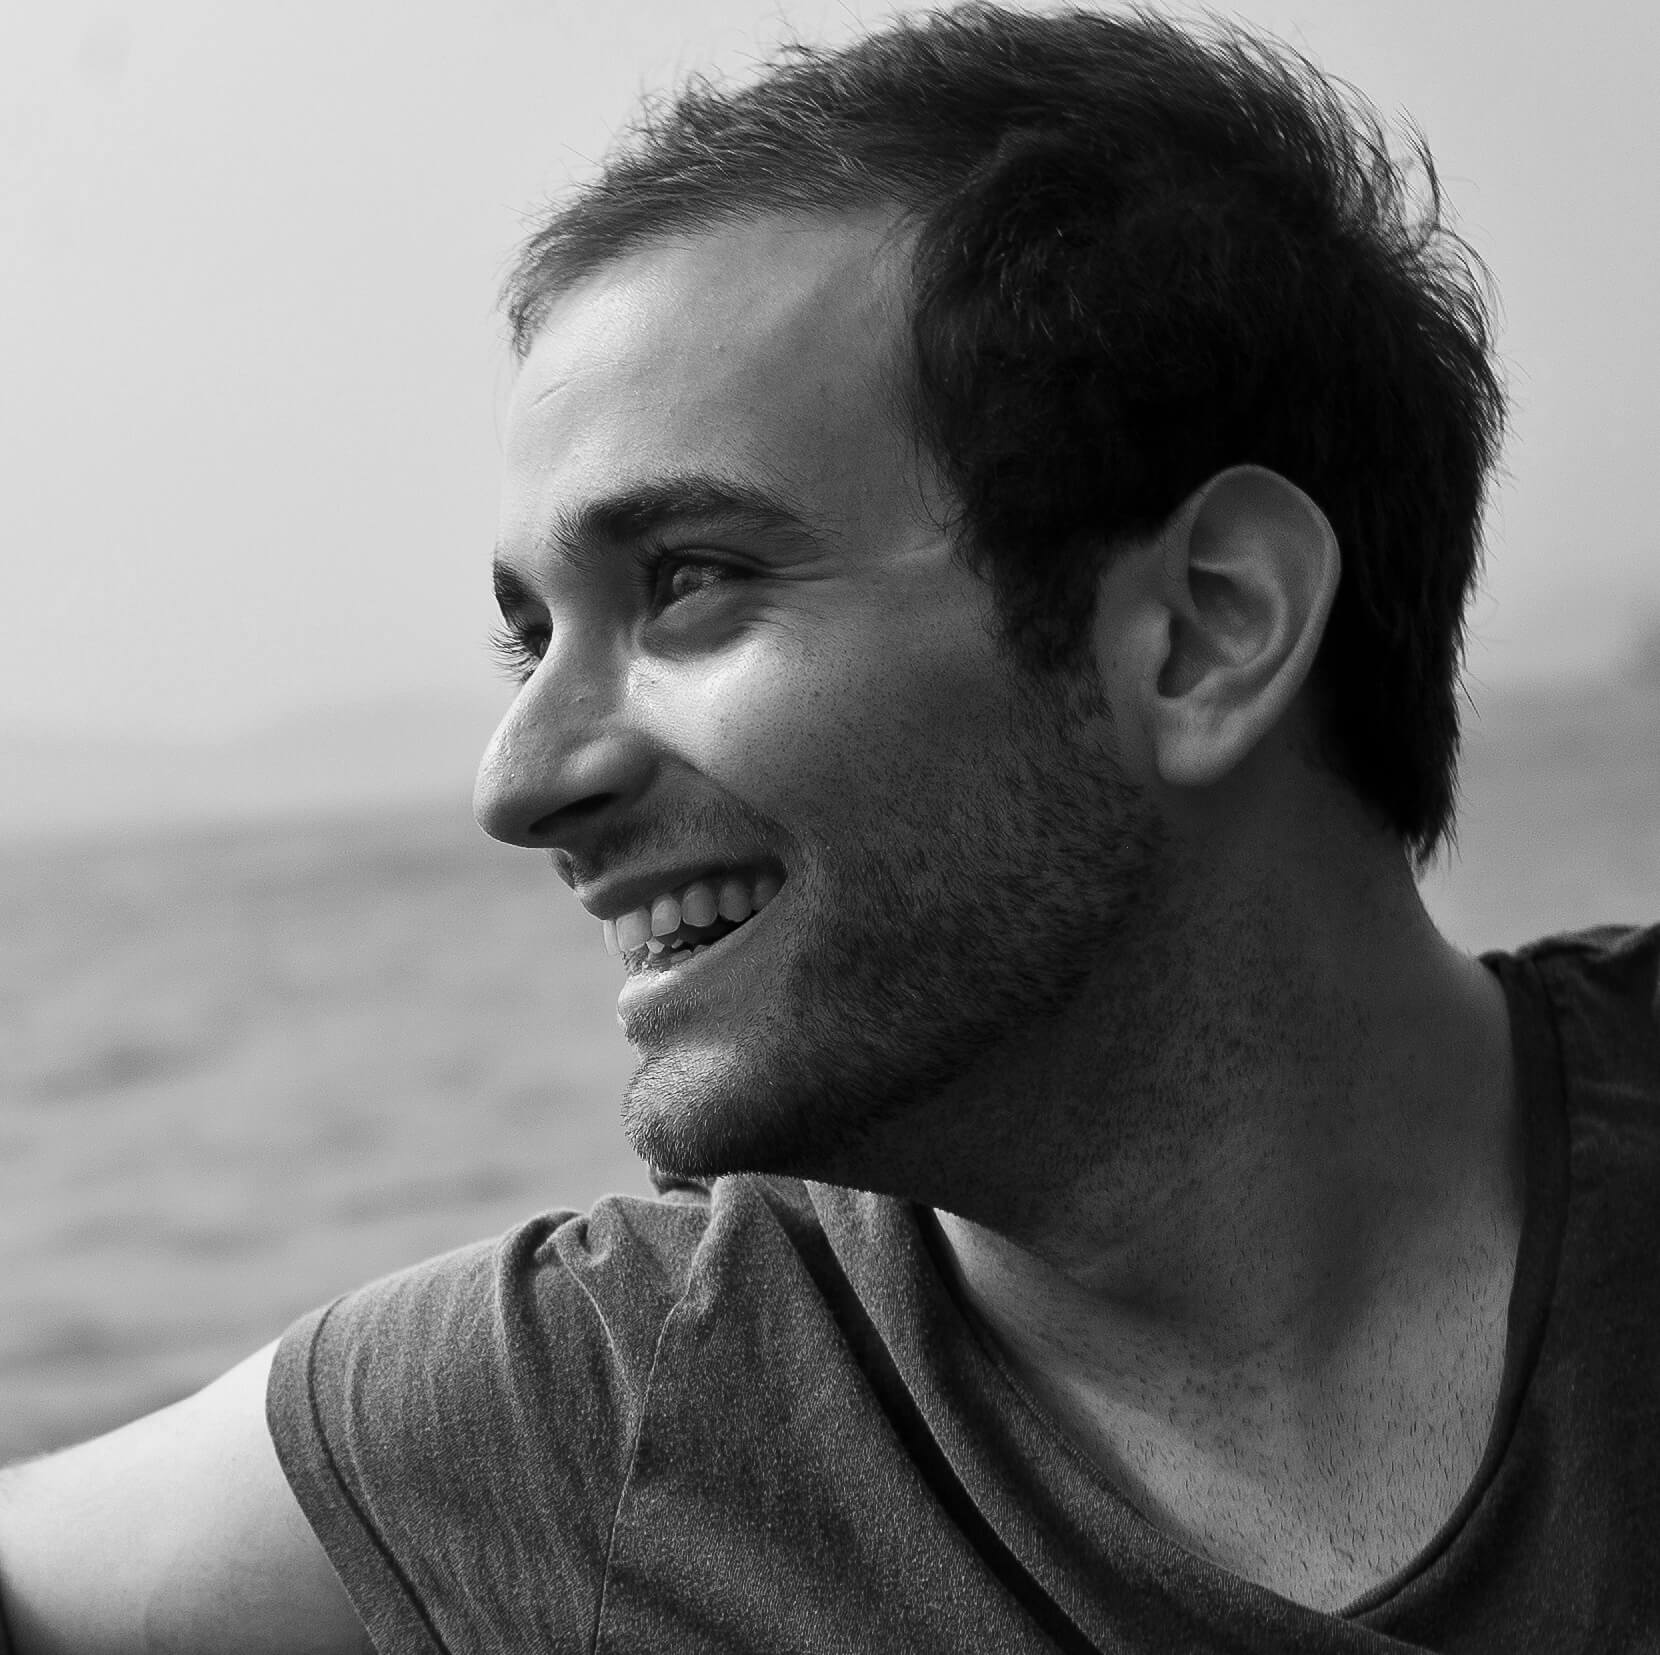 David Osit looking offscreen to his right, smiling. He has short hair and slight stubble. Black and white portrait, with out of focus background.